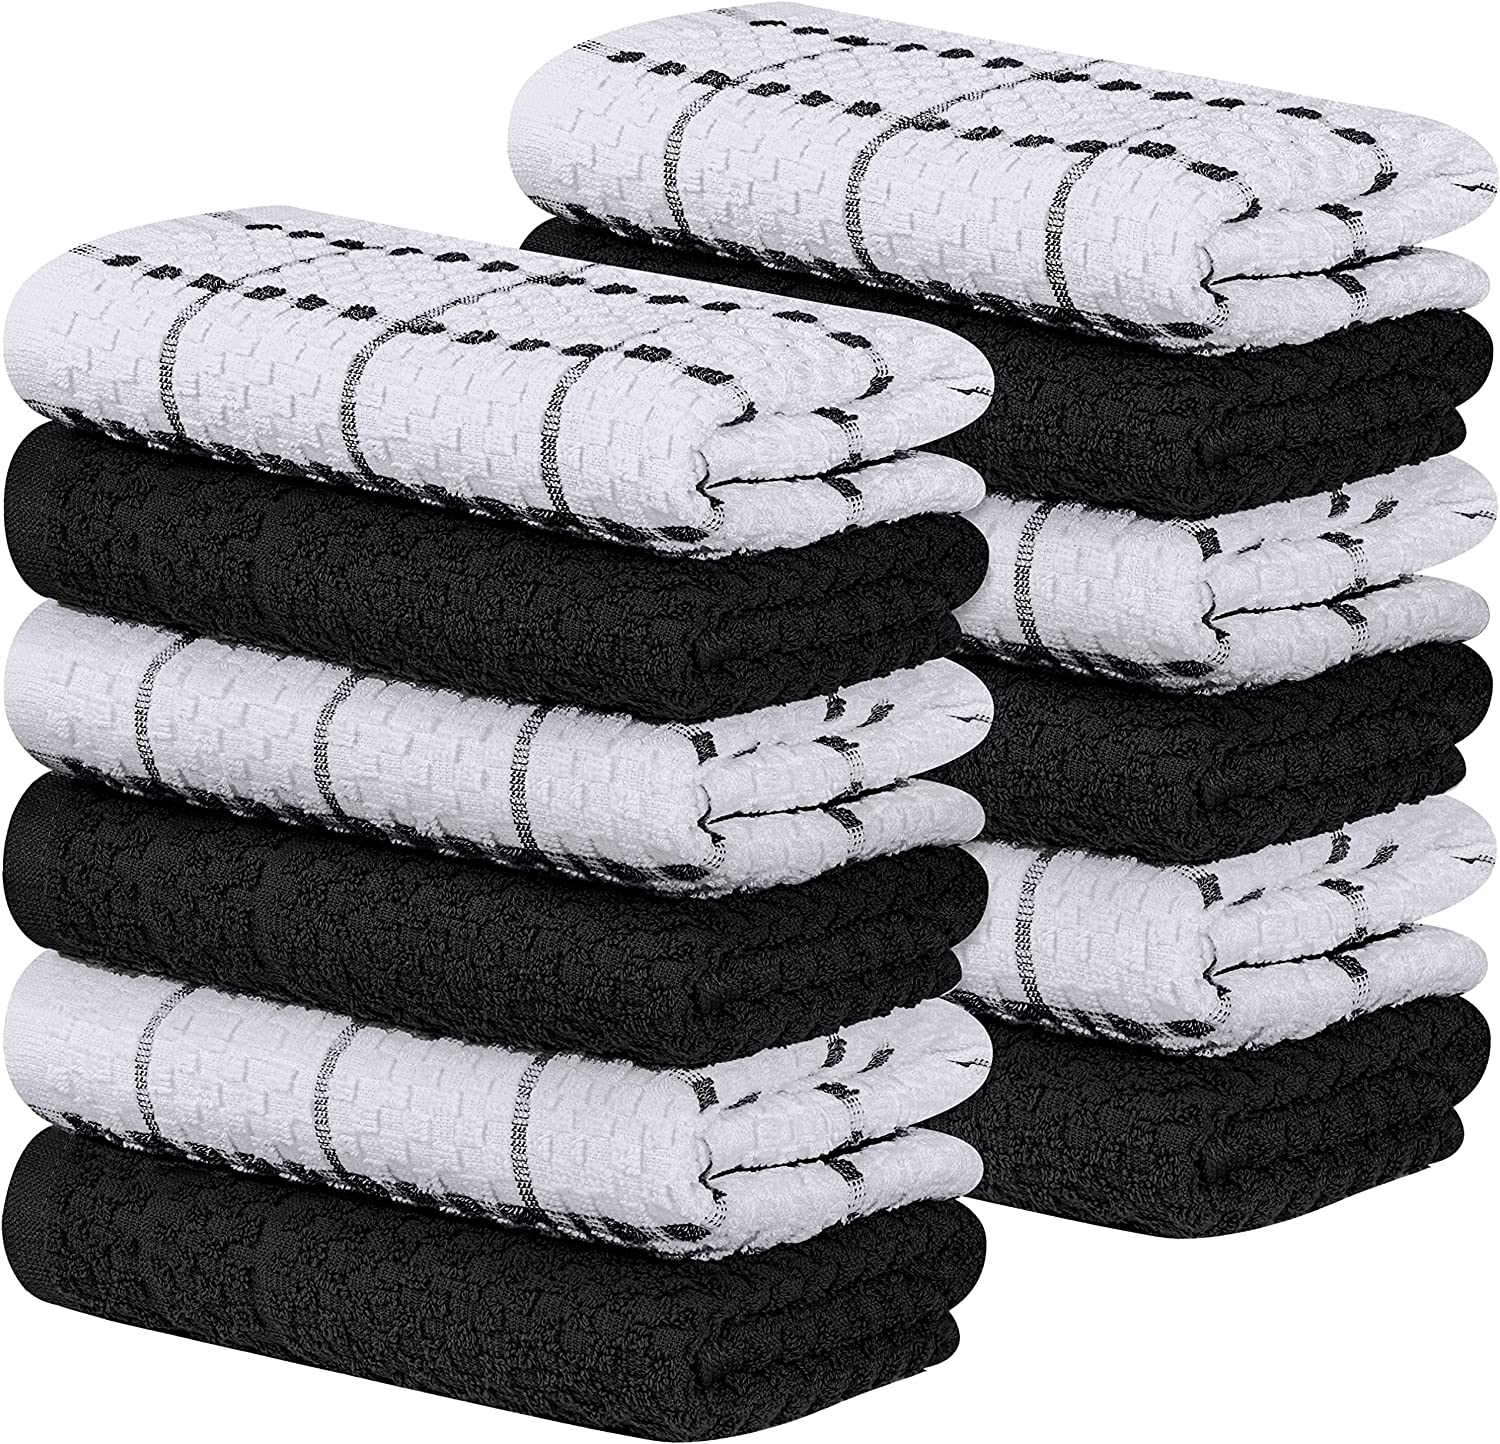 Zeppoli Dish Towels - Pack of 15-14 by 25 - Cotton Material - Kitchen  Hand Towels - Super Absorbent - Reusable Cleaning Cloths - Machine Washable  